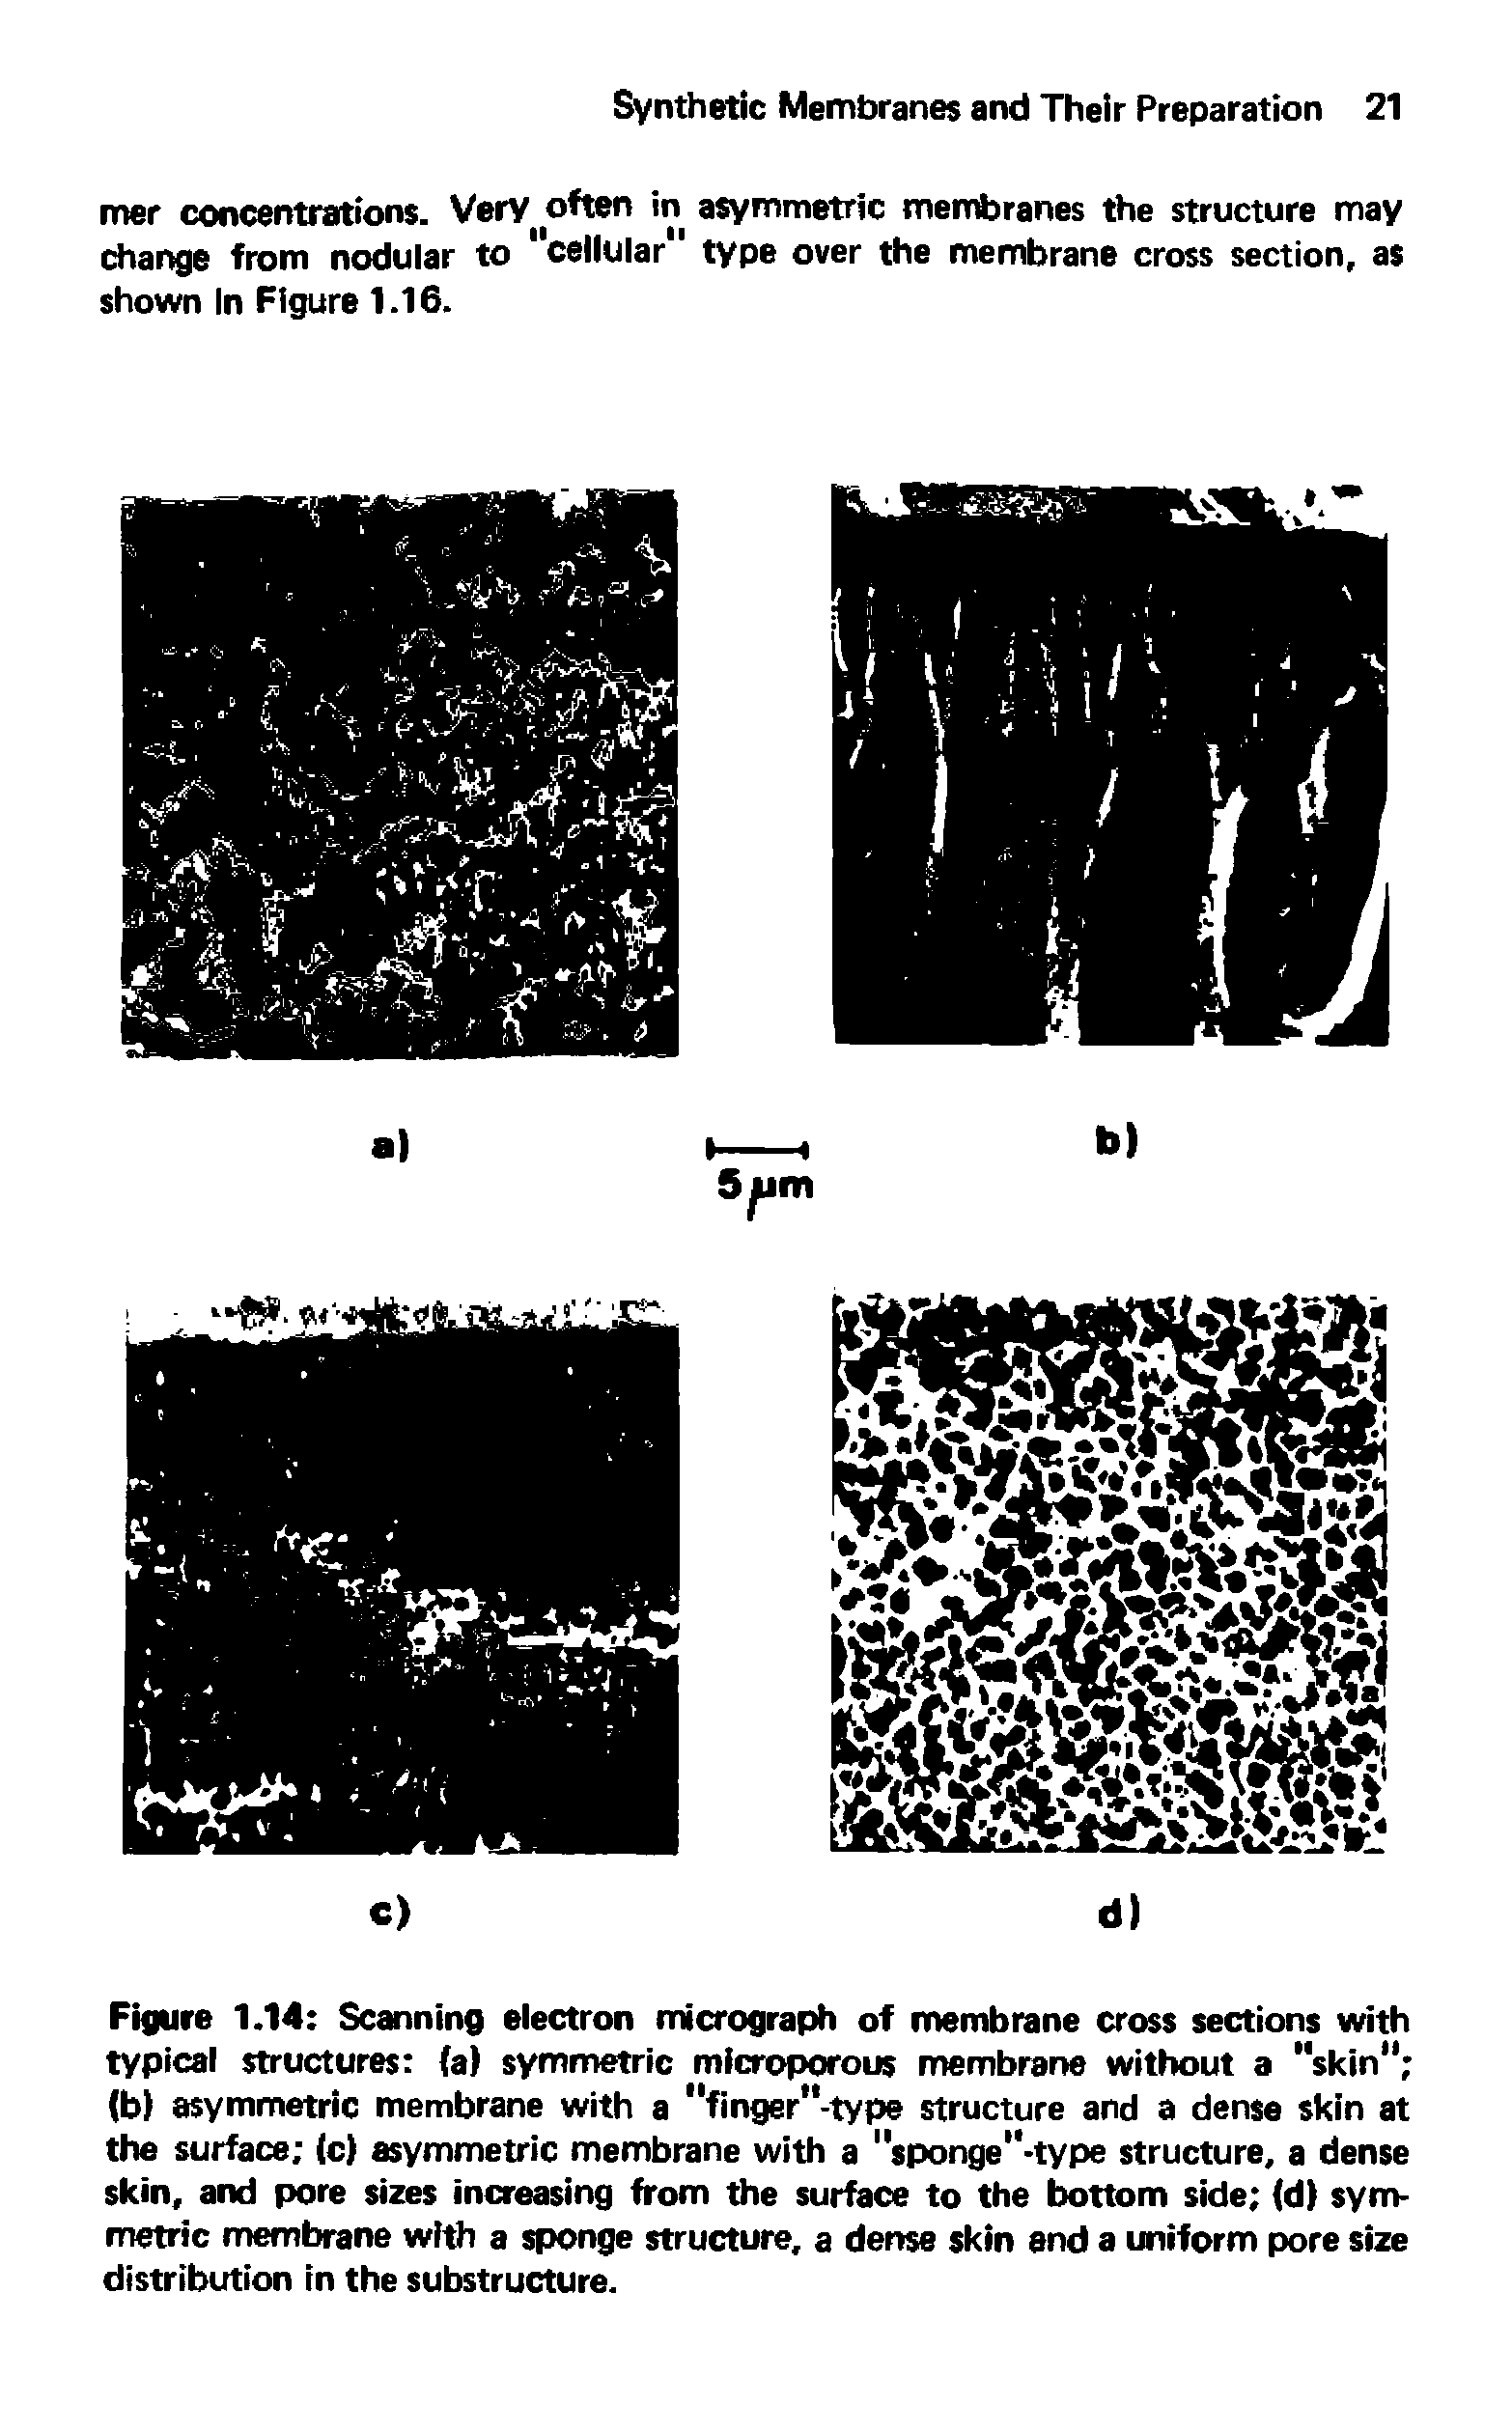 Figure 1.14 Scanning electron micrograph of membrane cross sections with typical structures (a) symmetric microporous membrane without a "skin" (b) asymmetric membrane with a "finger"-type structure and a dense skin at the surface (c) asymmetric membrane with a "sponge"-type structure, a dense skin, and pore sizes increasing from the surface to the bottom side (d) symmetric membrane with a sponge structure, a dense skin and a uniform pore size distribution in the substructure.